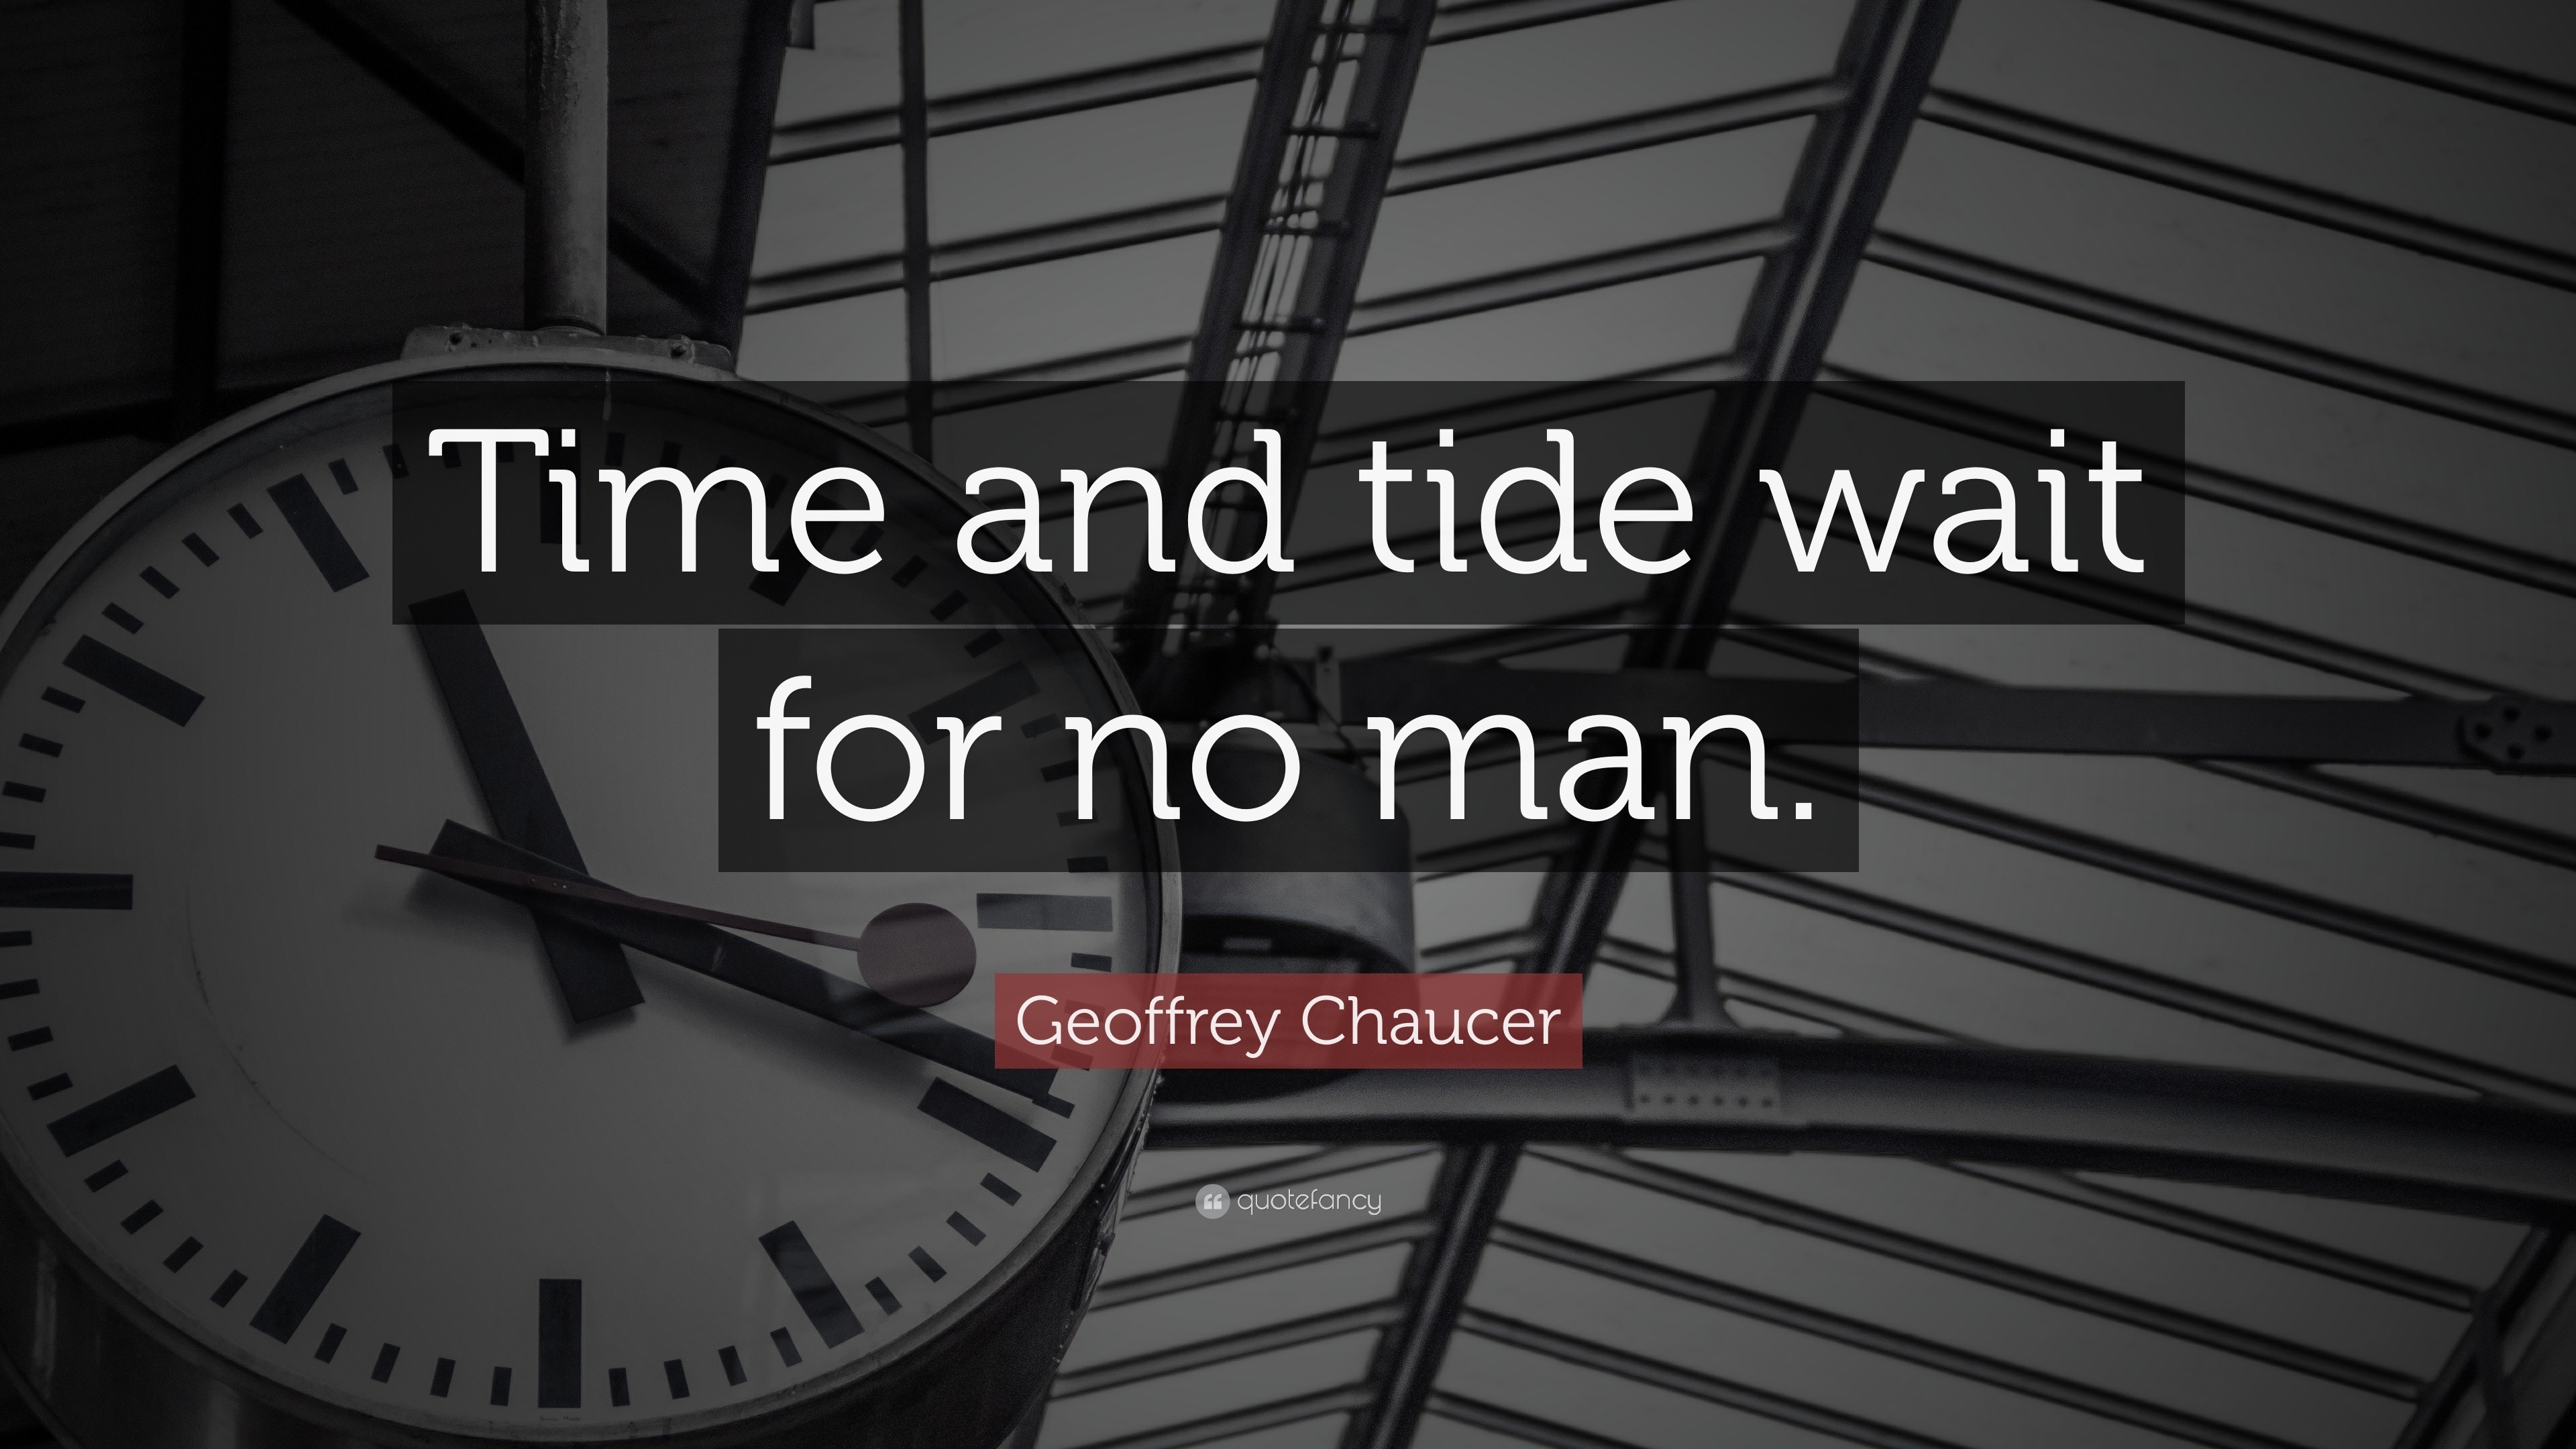 Geoffrey Chaucer Quote: “Time and tide wait for no man.”